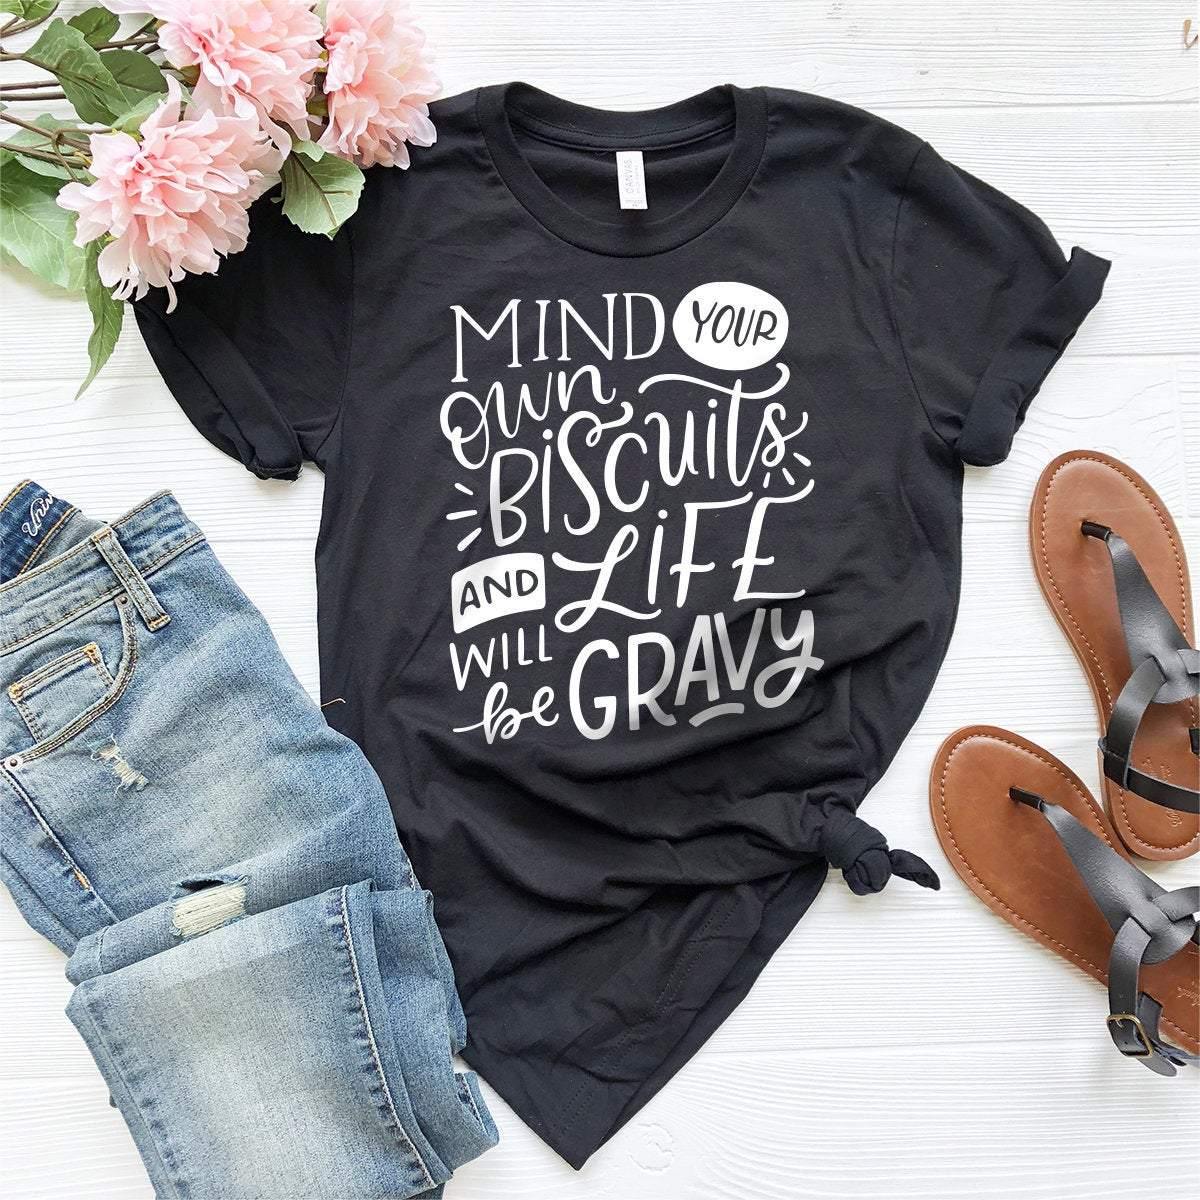 Country Shirt, Kacey Musgraves Shirt, Southern Women Shirt, Funny Women Tee, Mind Your Own Biscuits And Life Will Be Gravy Shirt, Music Gift - Fastdeliverytees.com